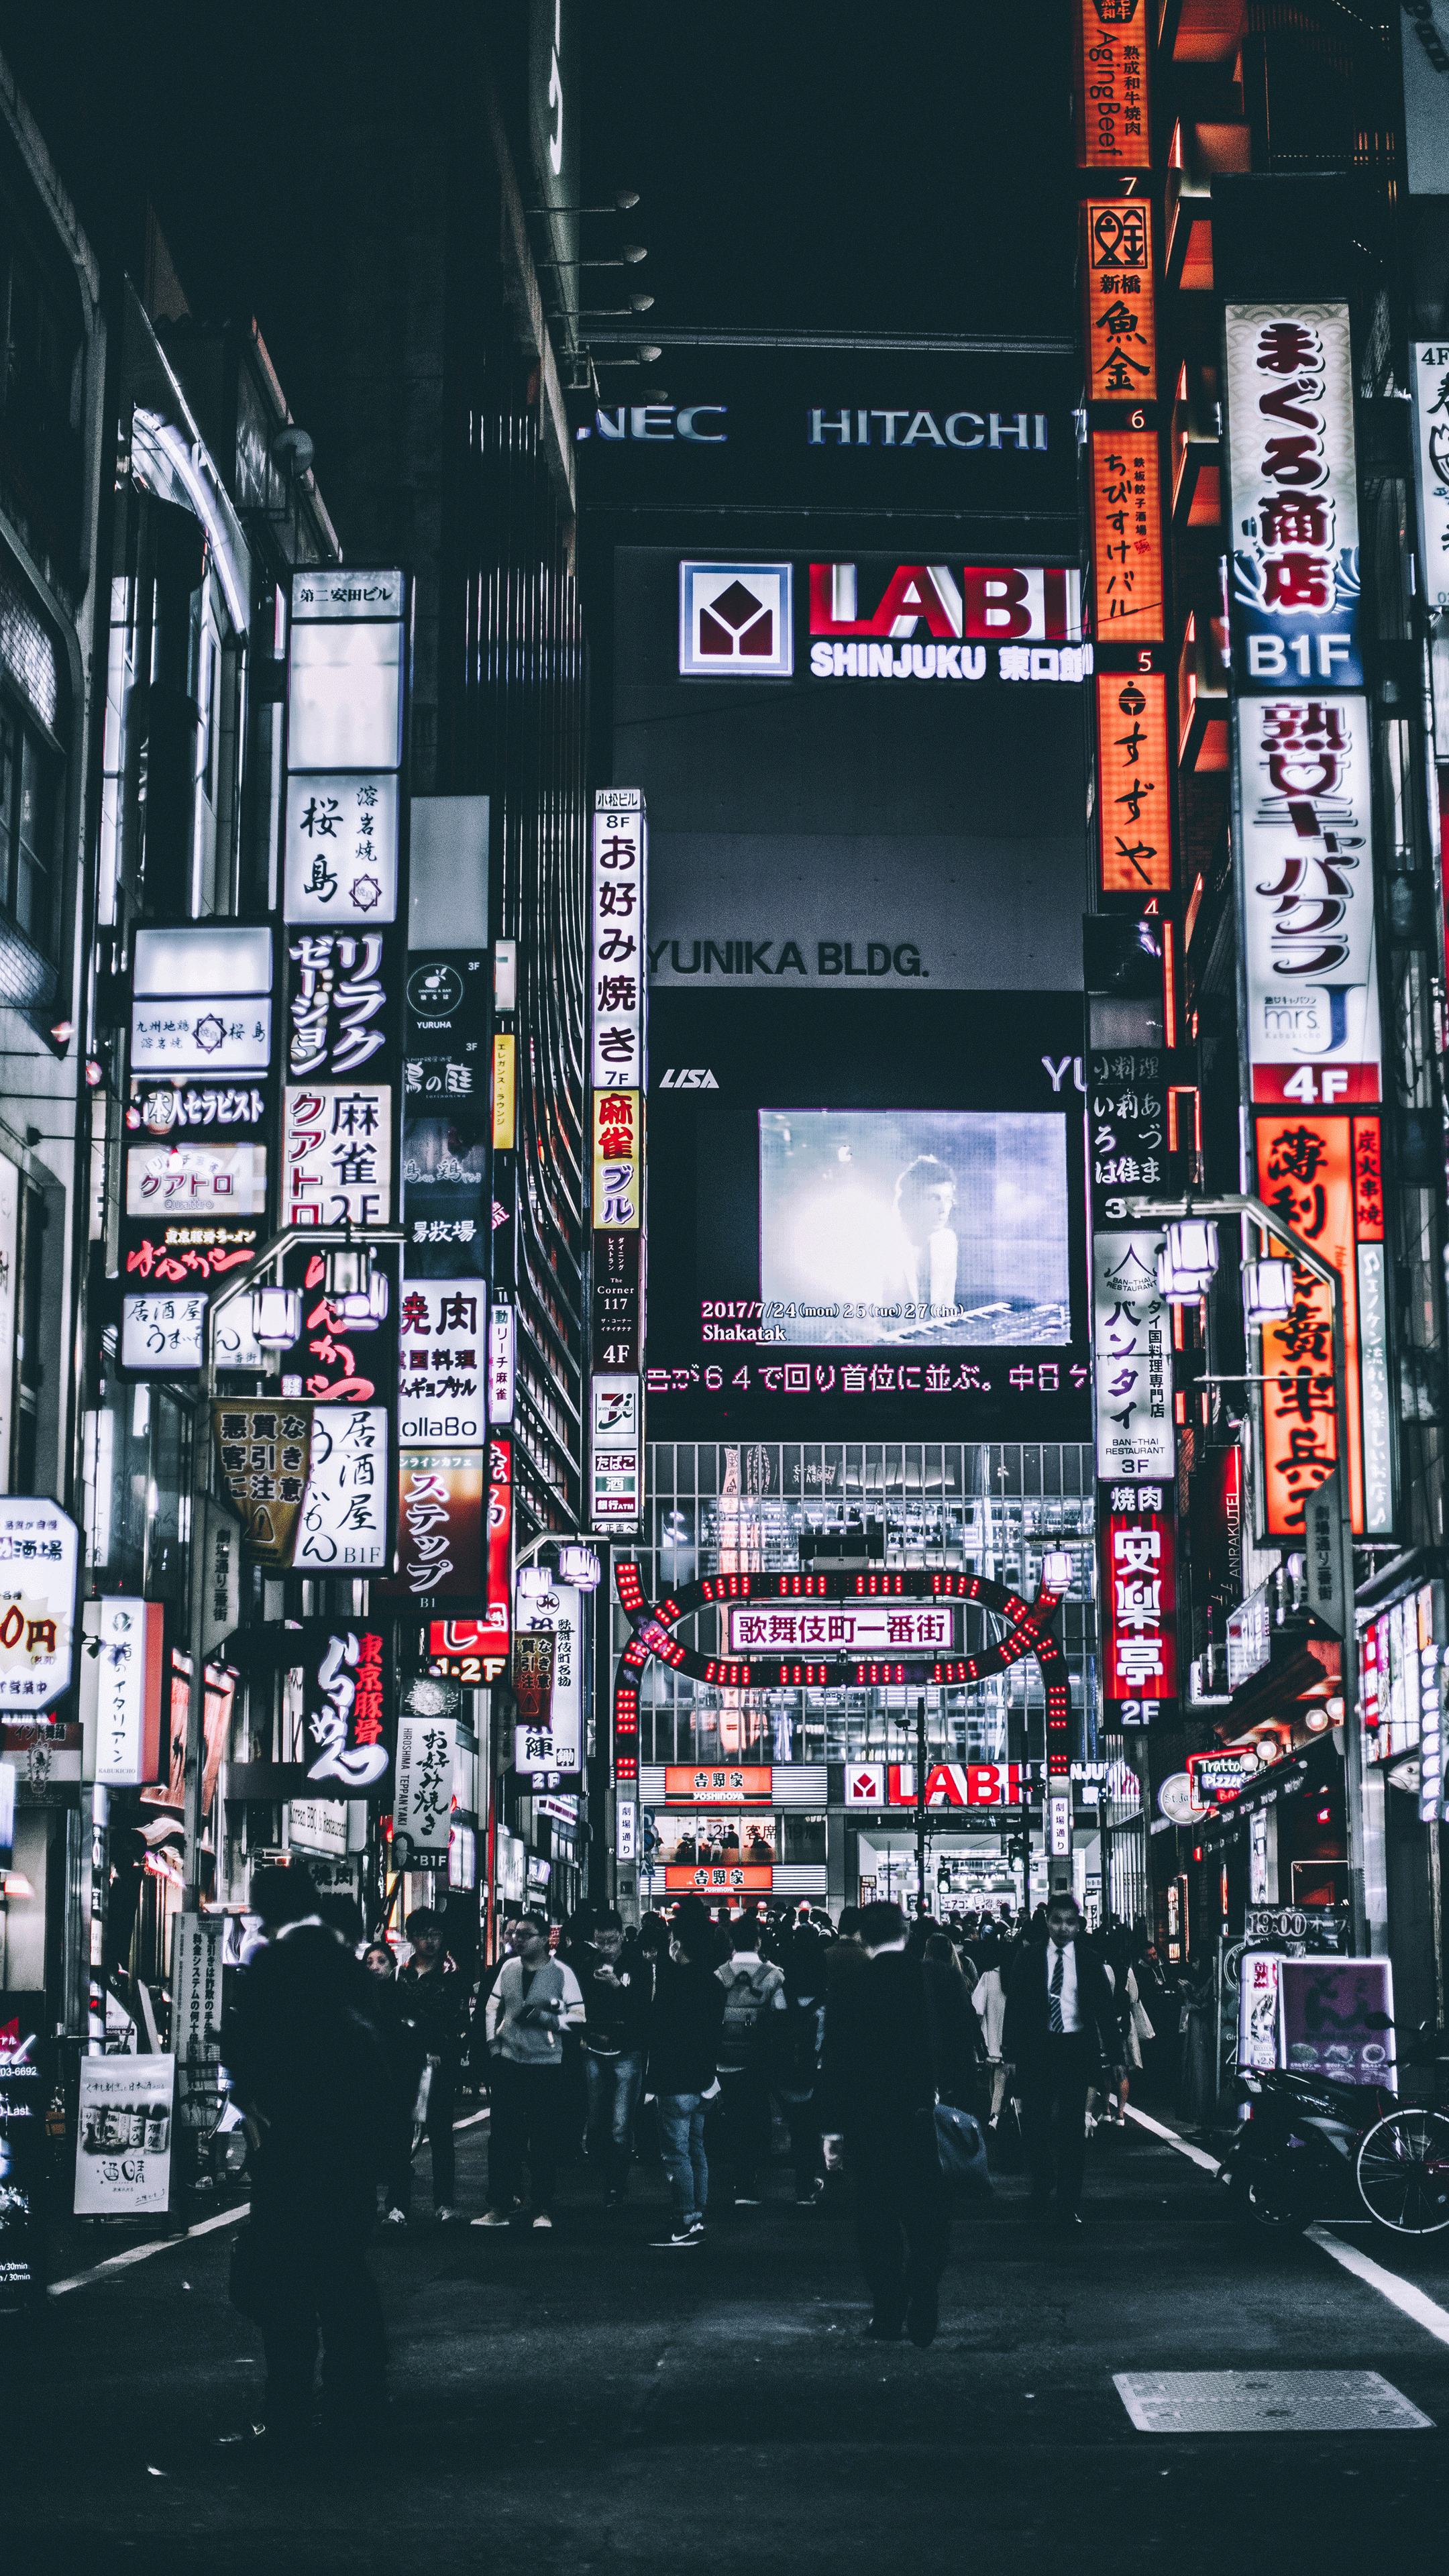 10 Choices wallpaper aesthetic tokyo You Can Use It For Free ...